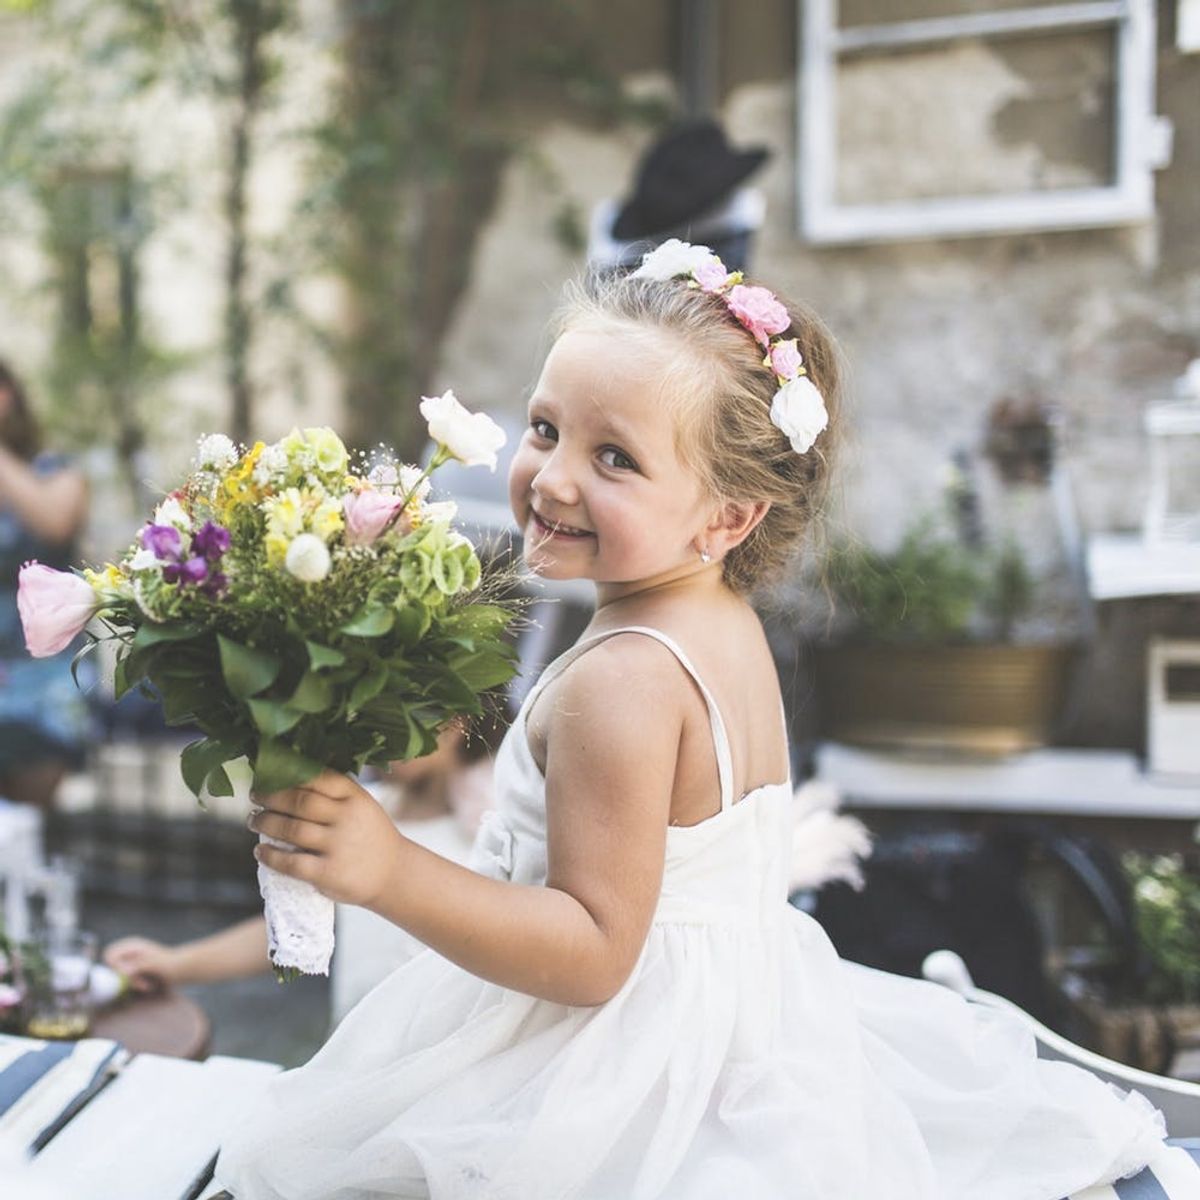 Weddings and Kids: Should You Invite Them?